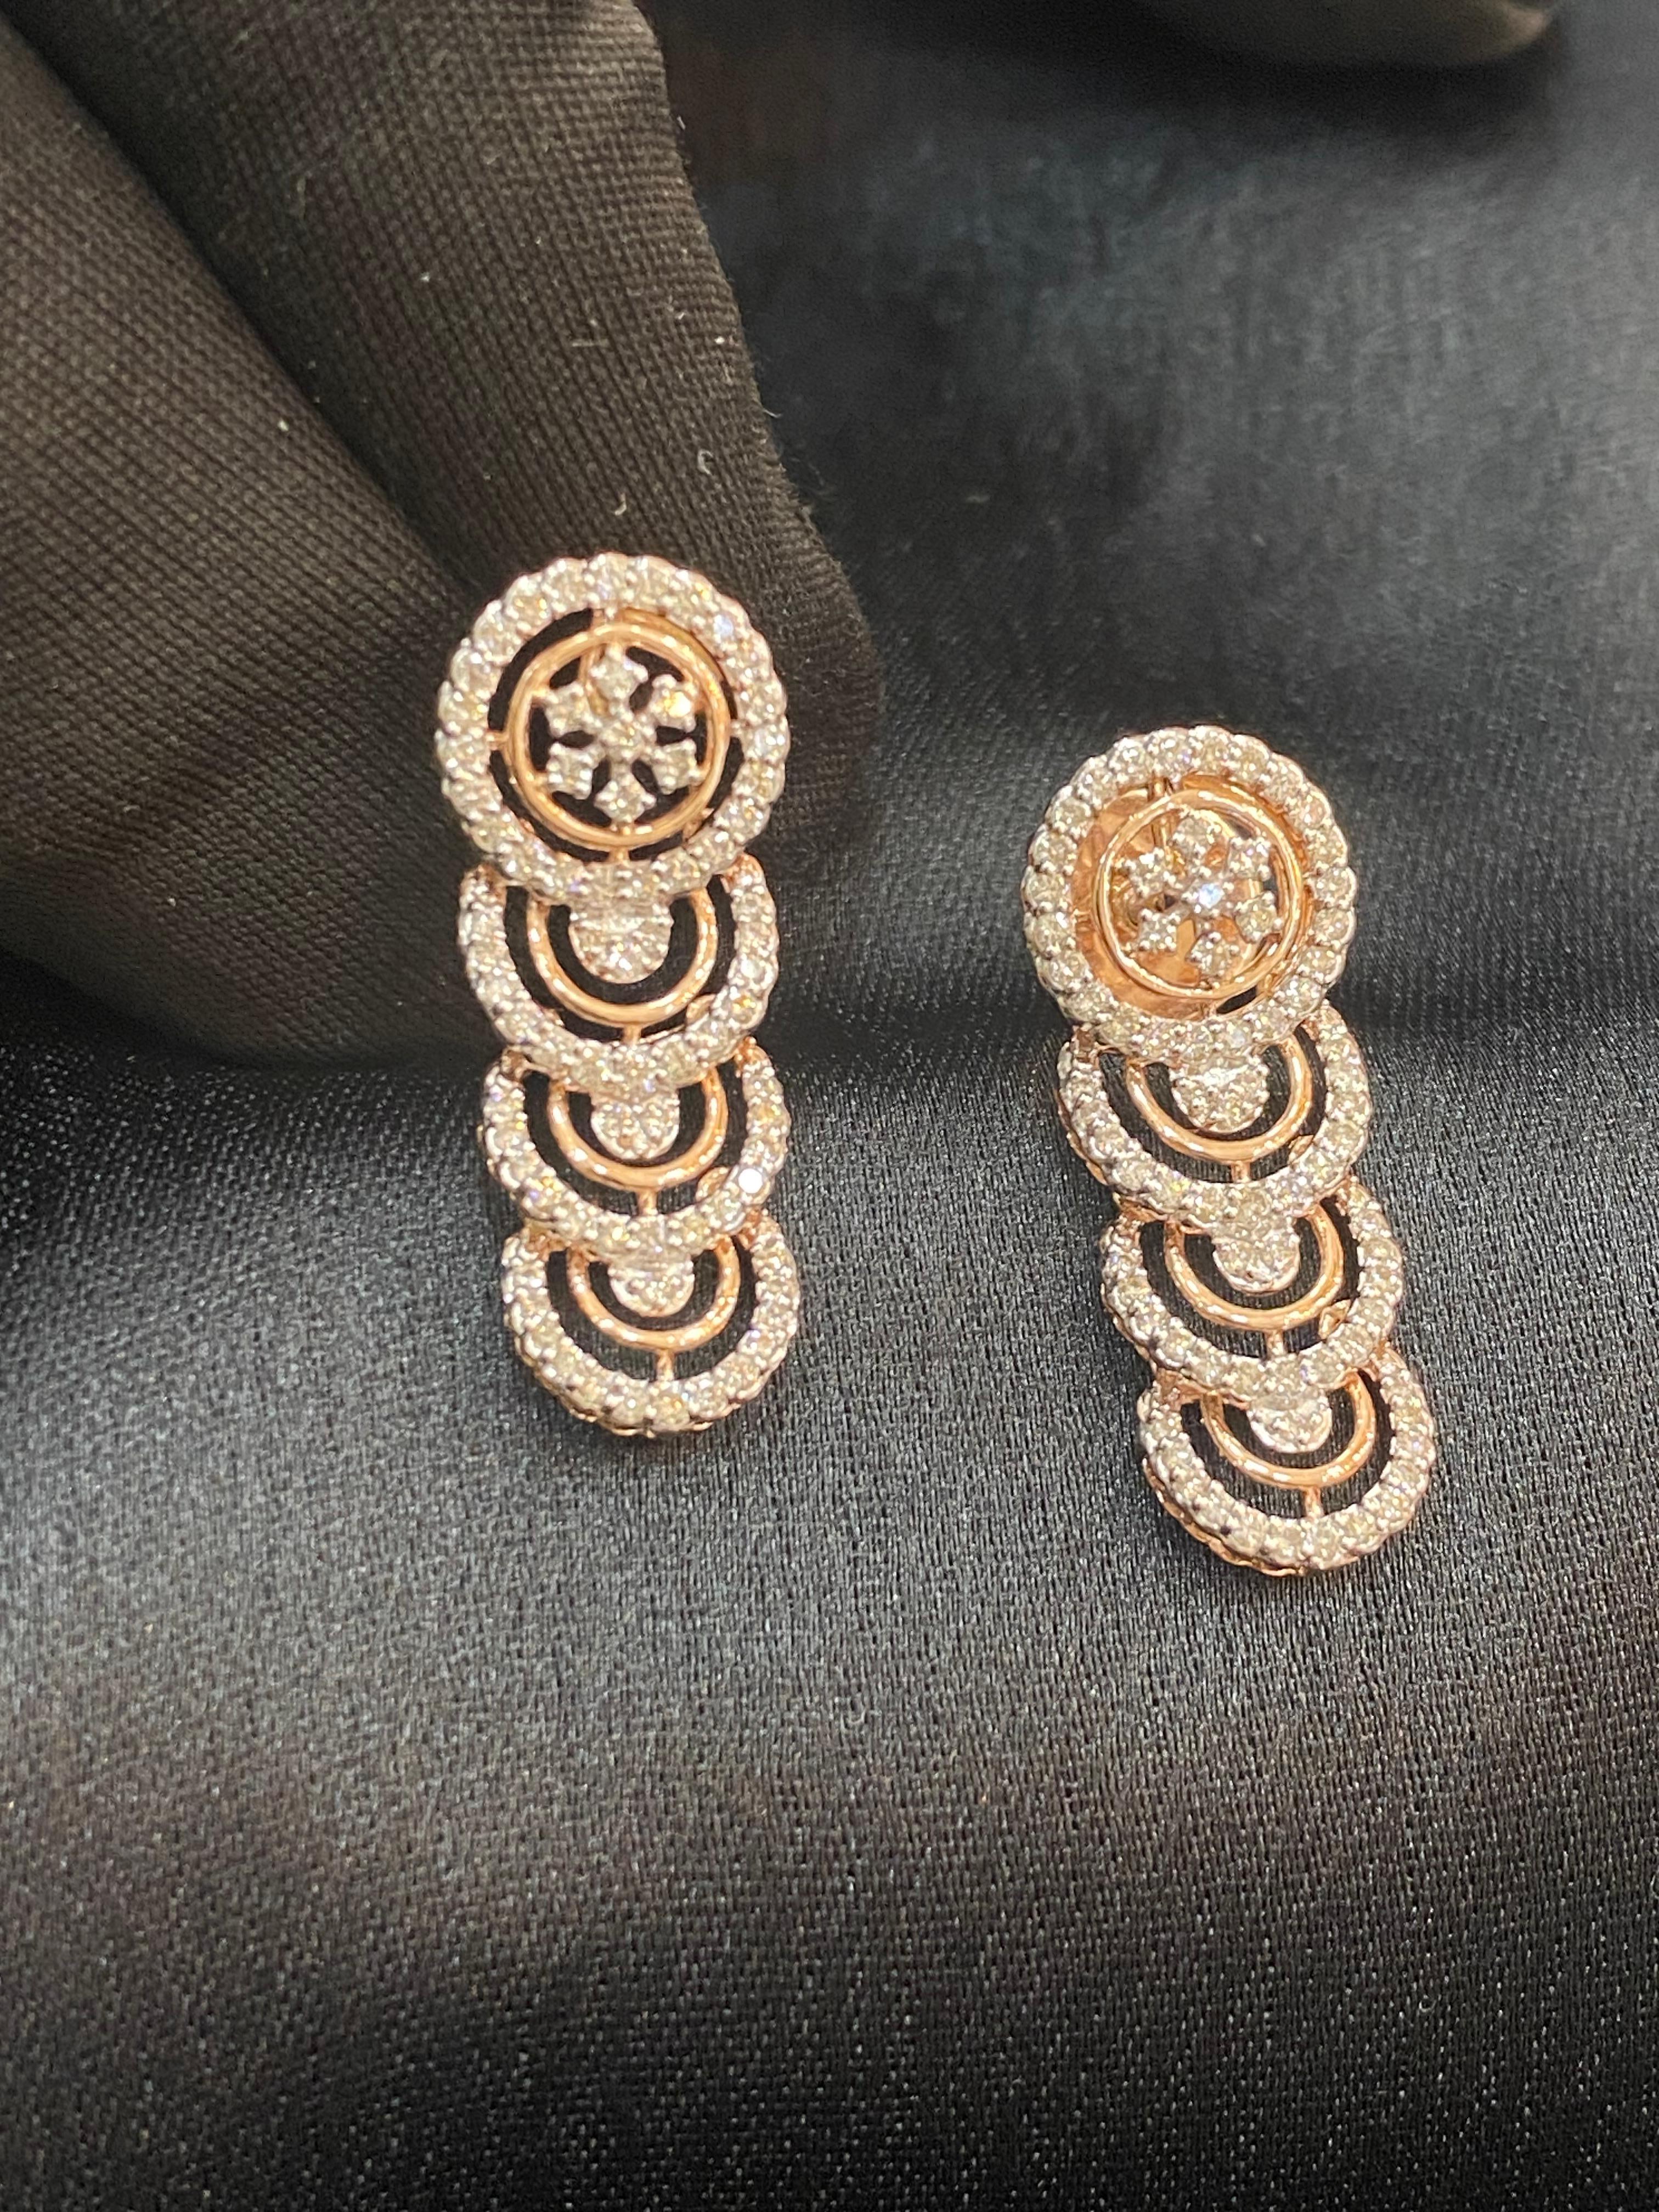 Discover the enchantment of these 14k Rose Gold Dangle Earrings, elevating traditional attire with their exquisite brilliance. Adorned with 0.95 carats of shimmering diamonds, they exude timeless elegance and grace.!

Specifications : 

Diamond